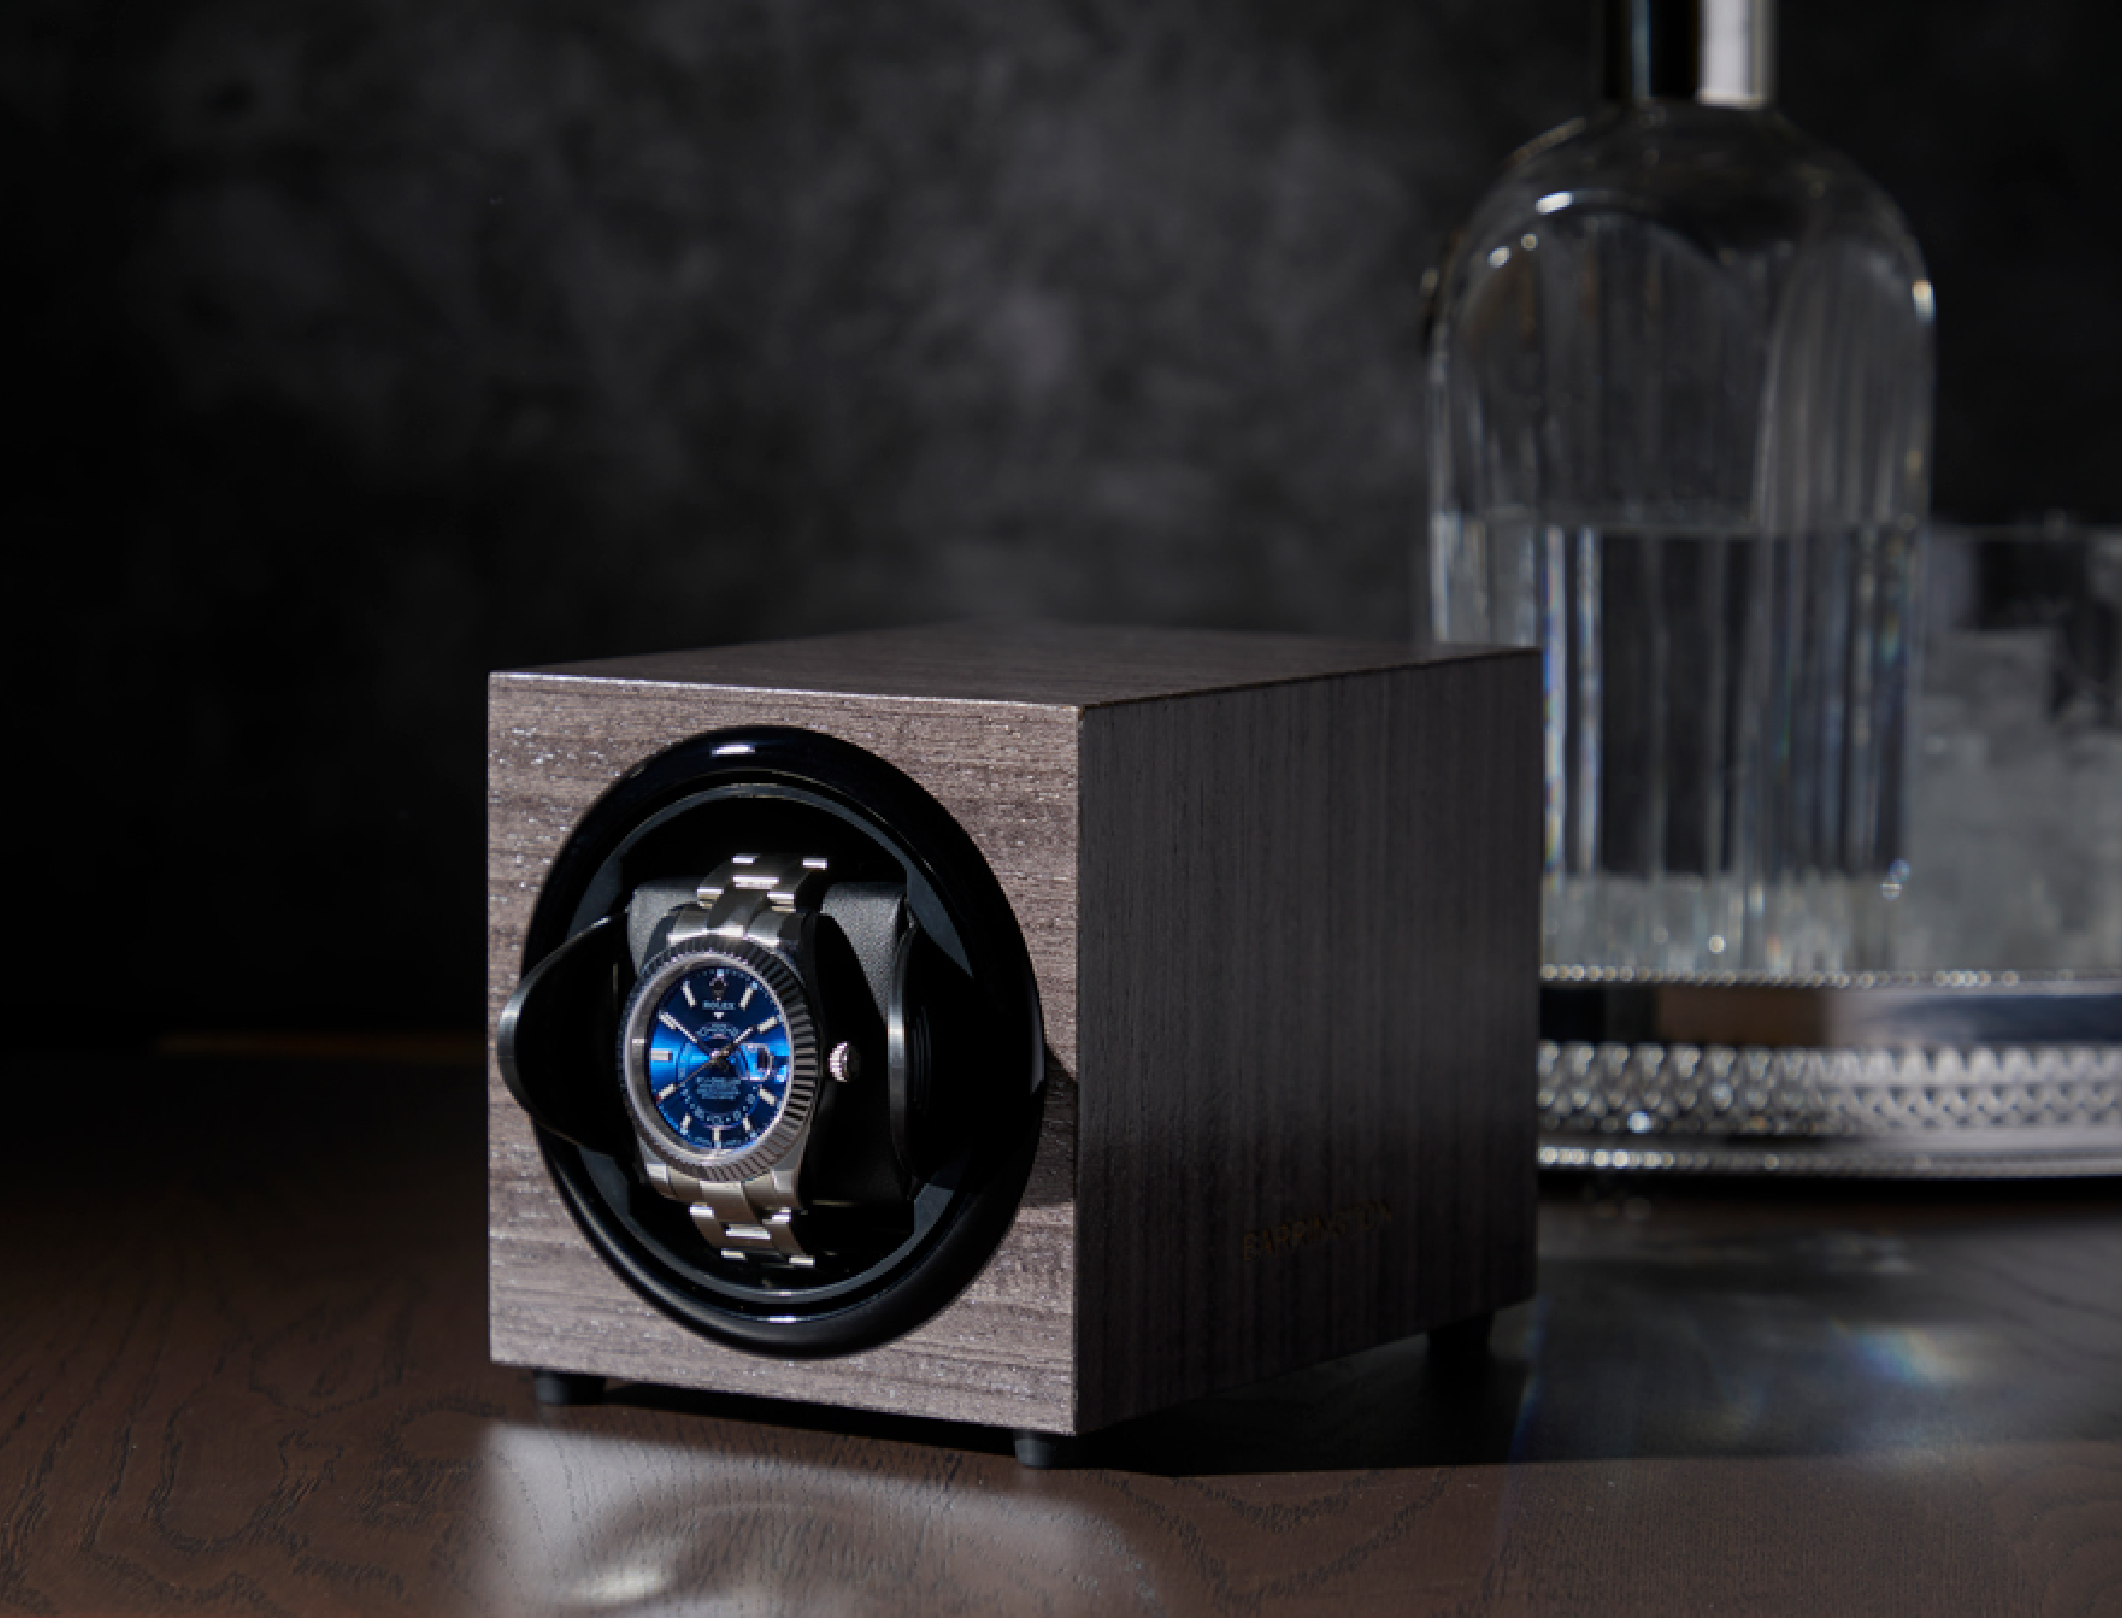 Wooden watch winder on table